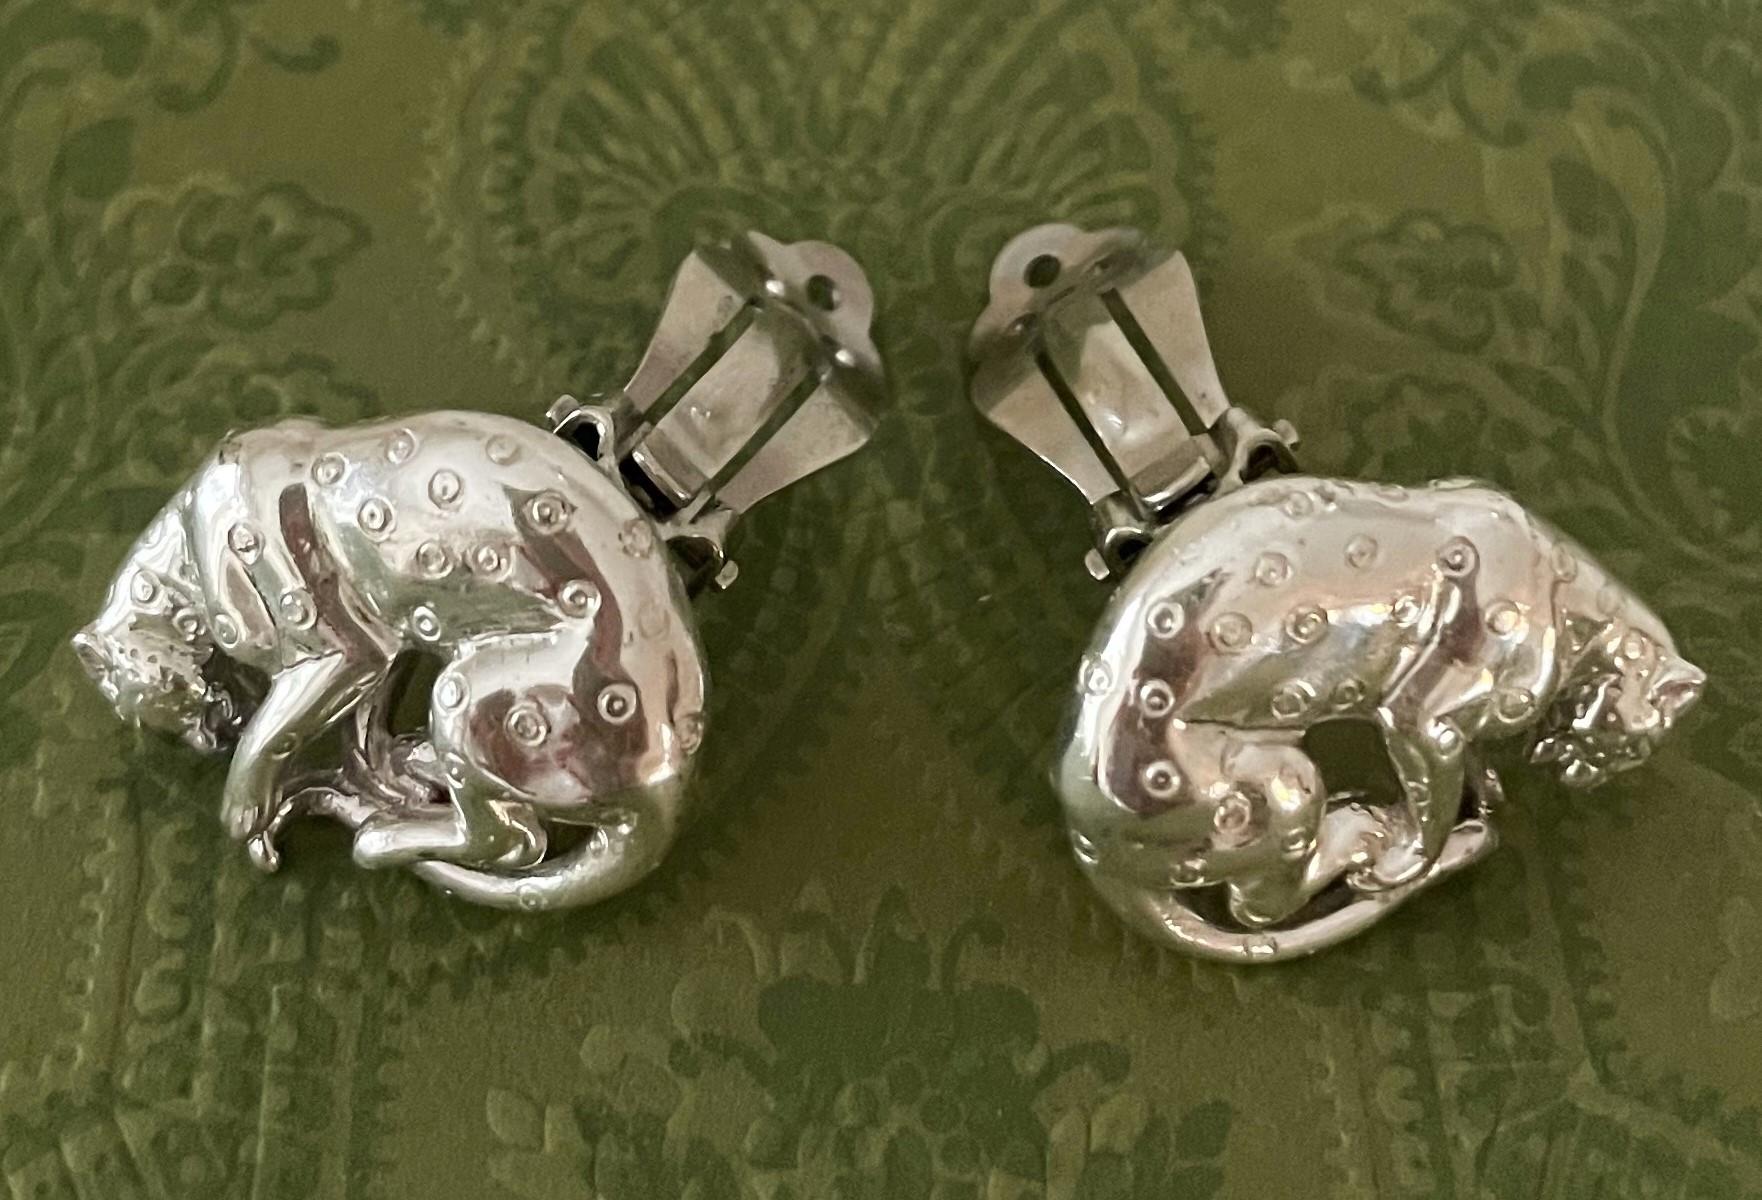 Very rare and one-of-a kind Sergio Busamente Earrings. These sterling earrings show a leopard.  Engraved Mex 927 on one and the full Sergio Bustamante script signature on the other. They are handmade and are in excellent condition. 
Sergio